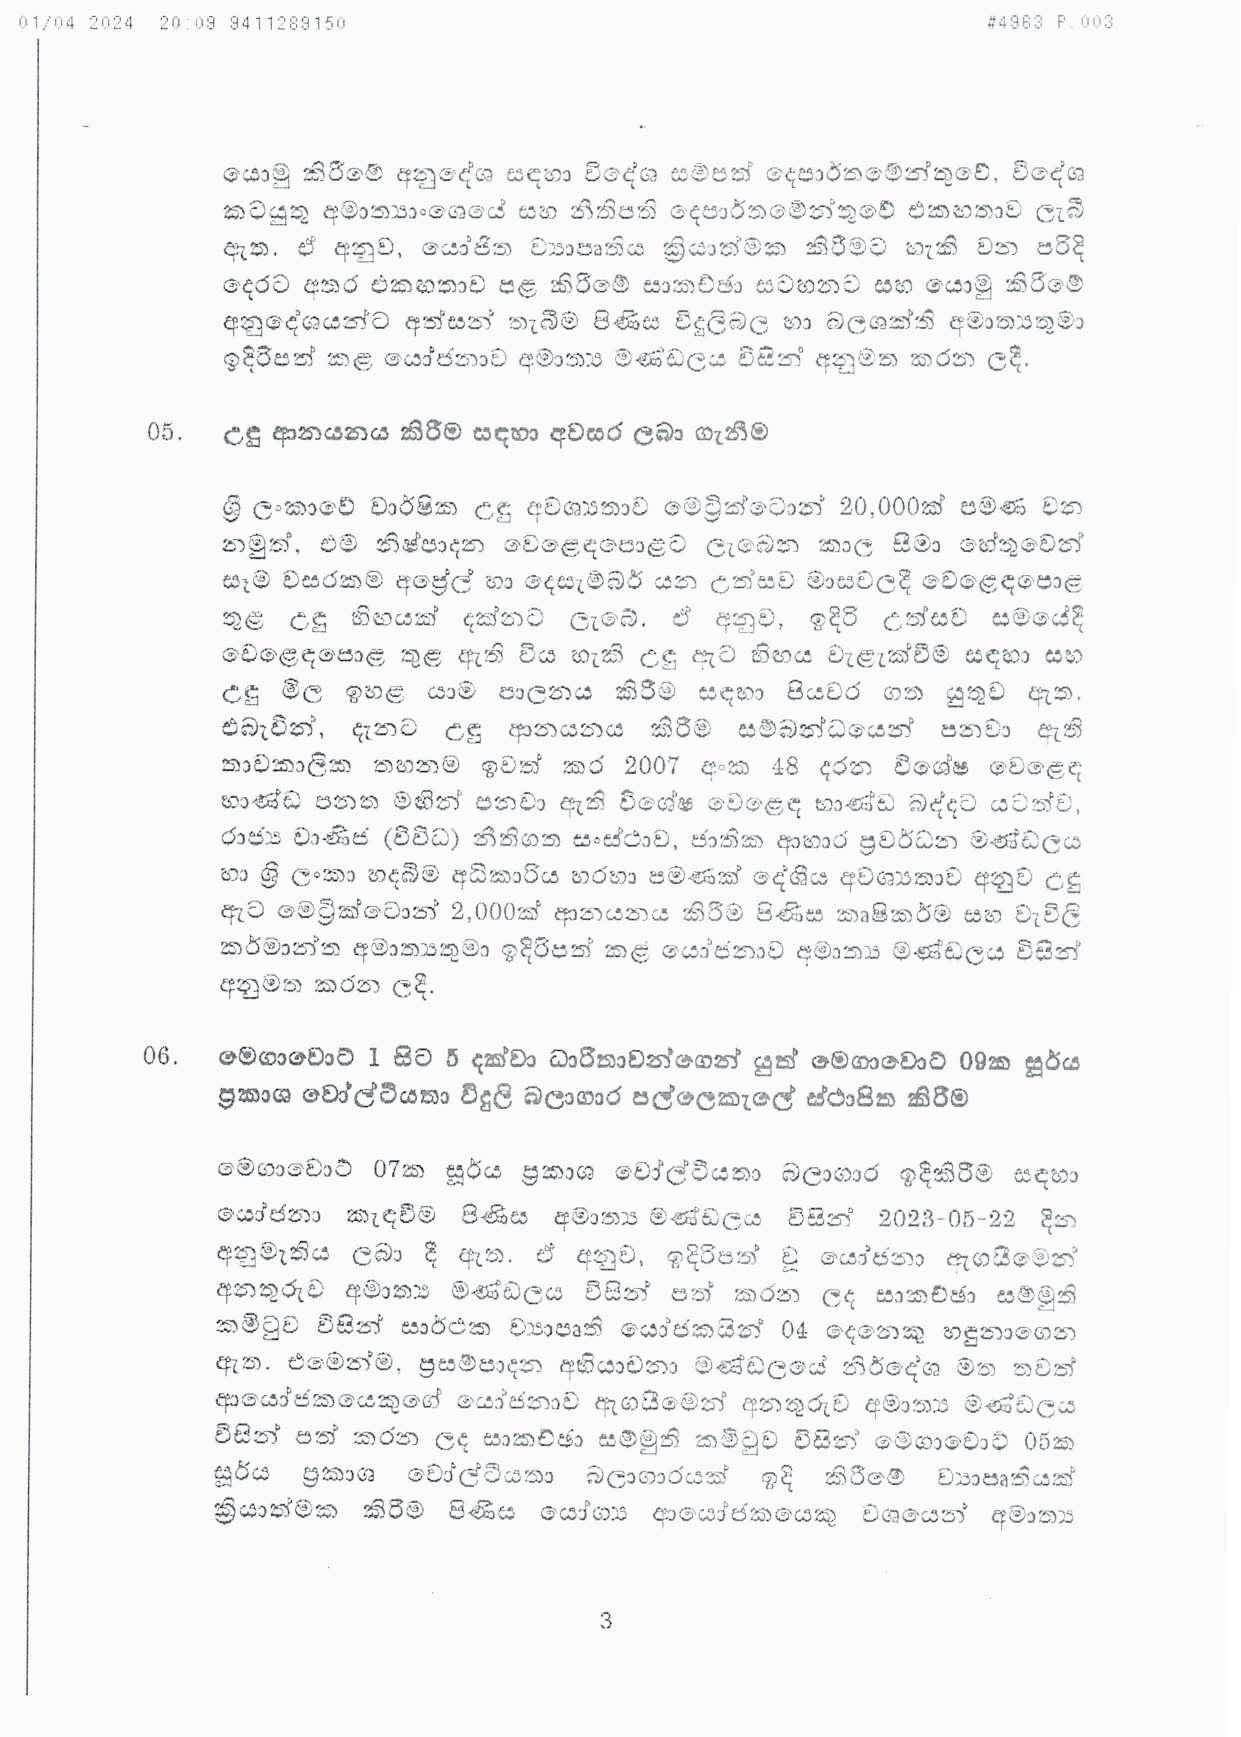 Cabinet Decisions on 01.04.2024 compressed page 003